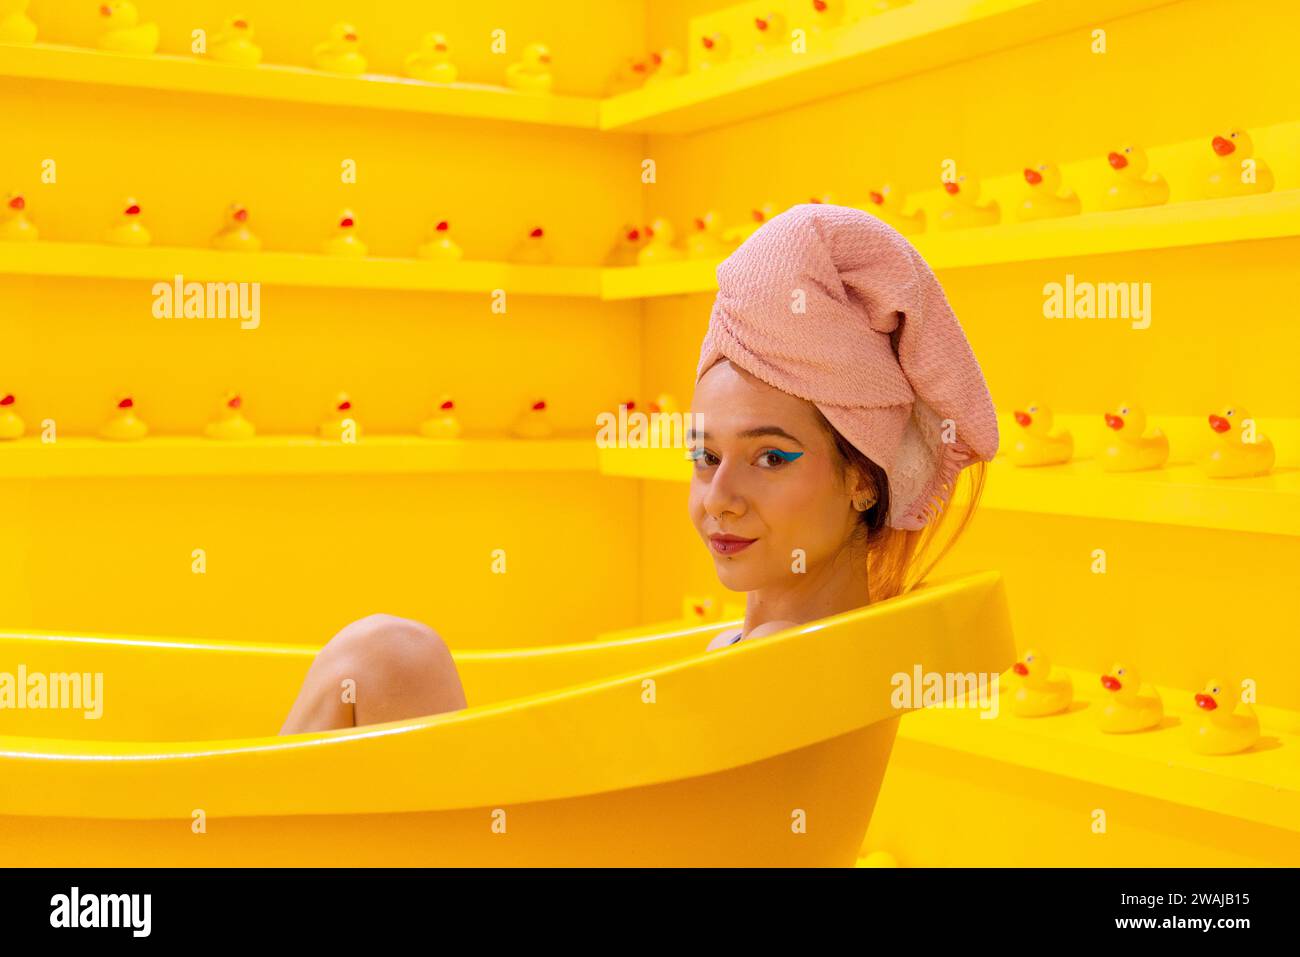 A woman with a towel wrapped head relaxing in a bright yellow bathtub surrounded by rubber ducks in a monochromatic setting Stock Photo